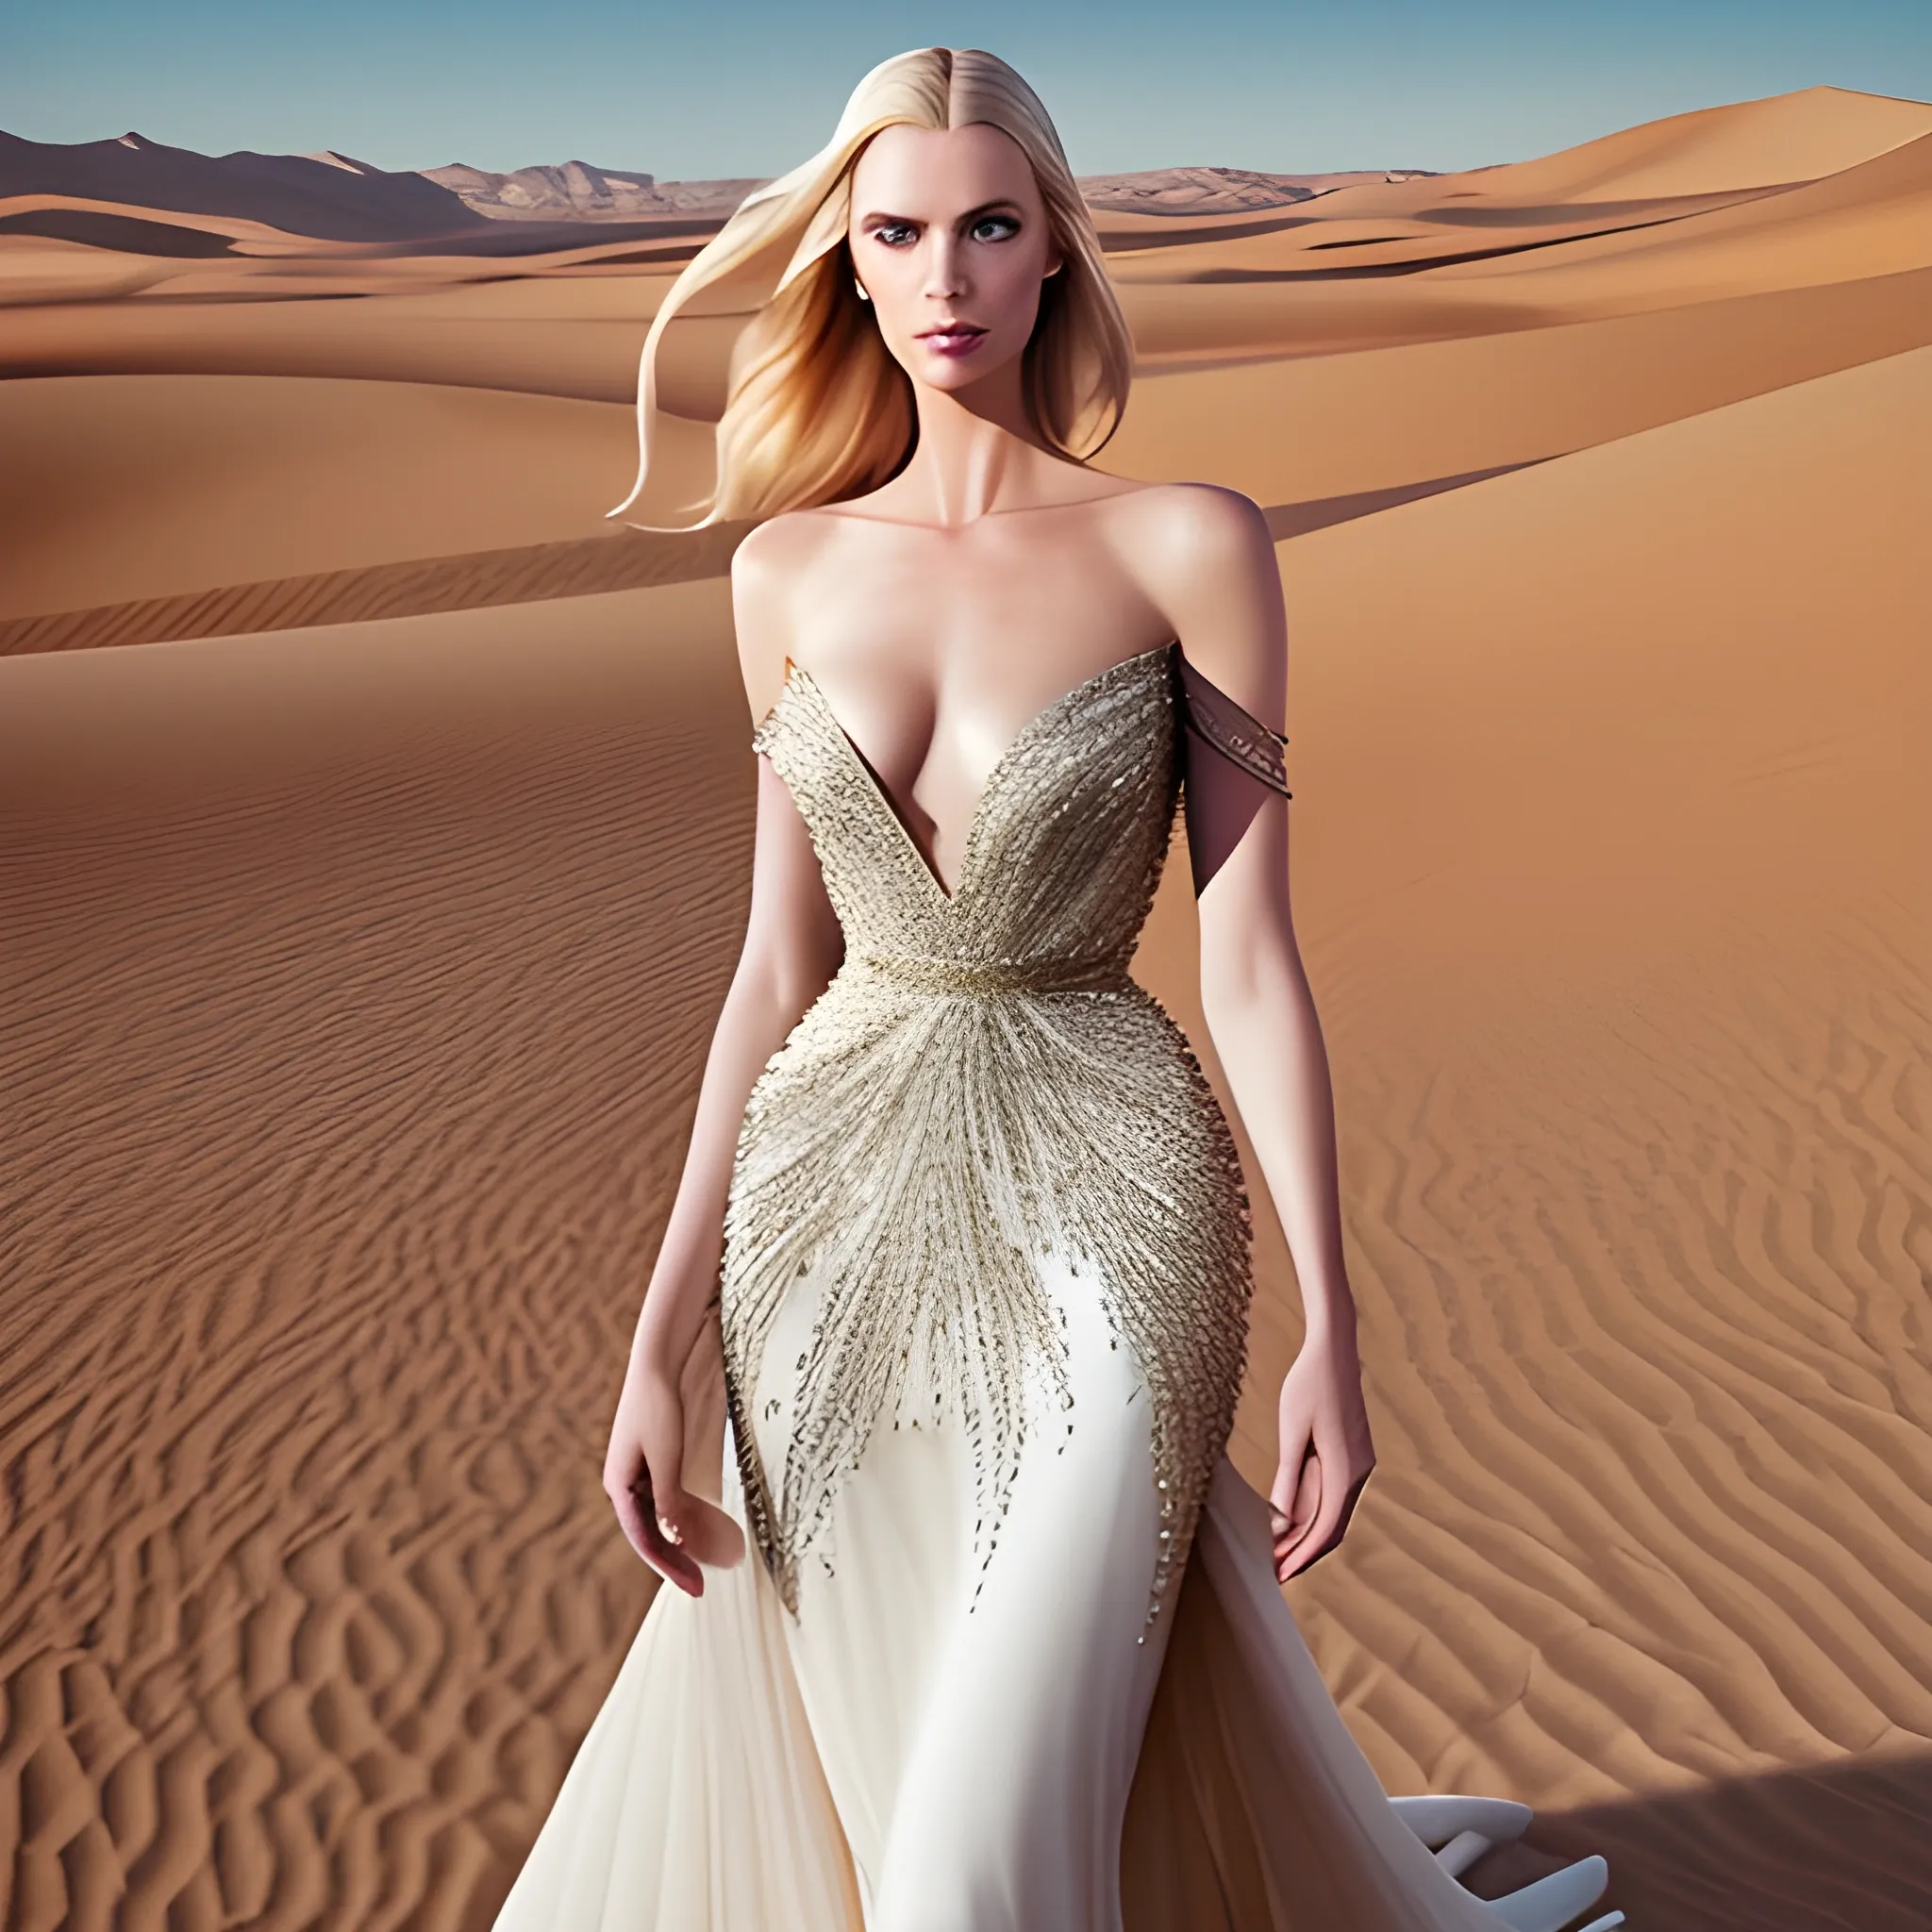 beautiful girl fair, blonde.  wearing Elie Saab garment, with minimal accessory in the middle of the desert. 

realistic, photograph 